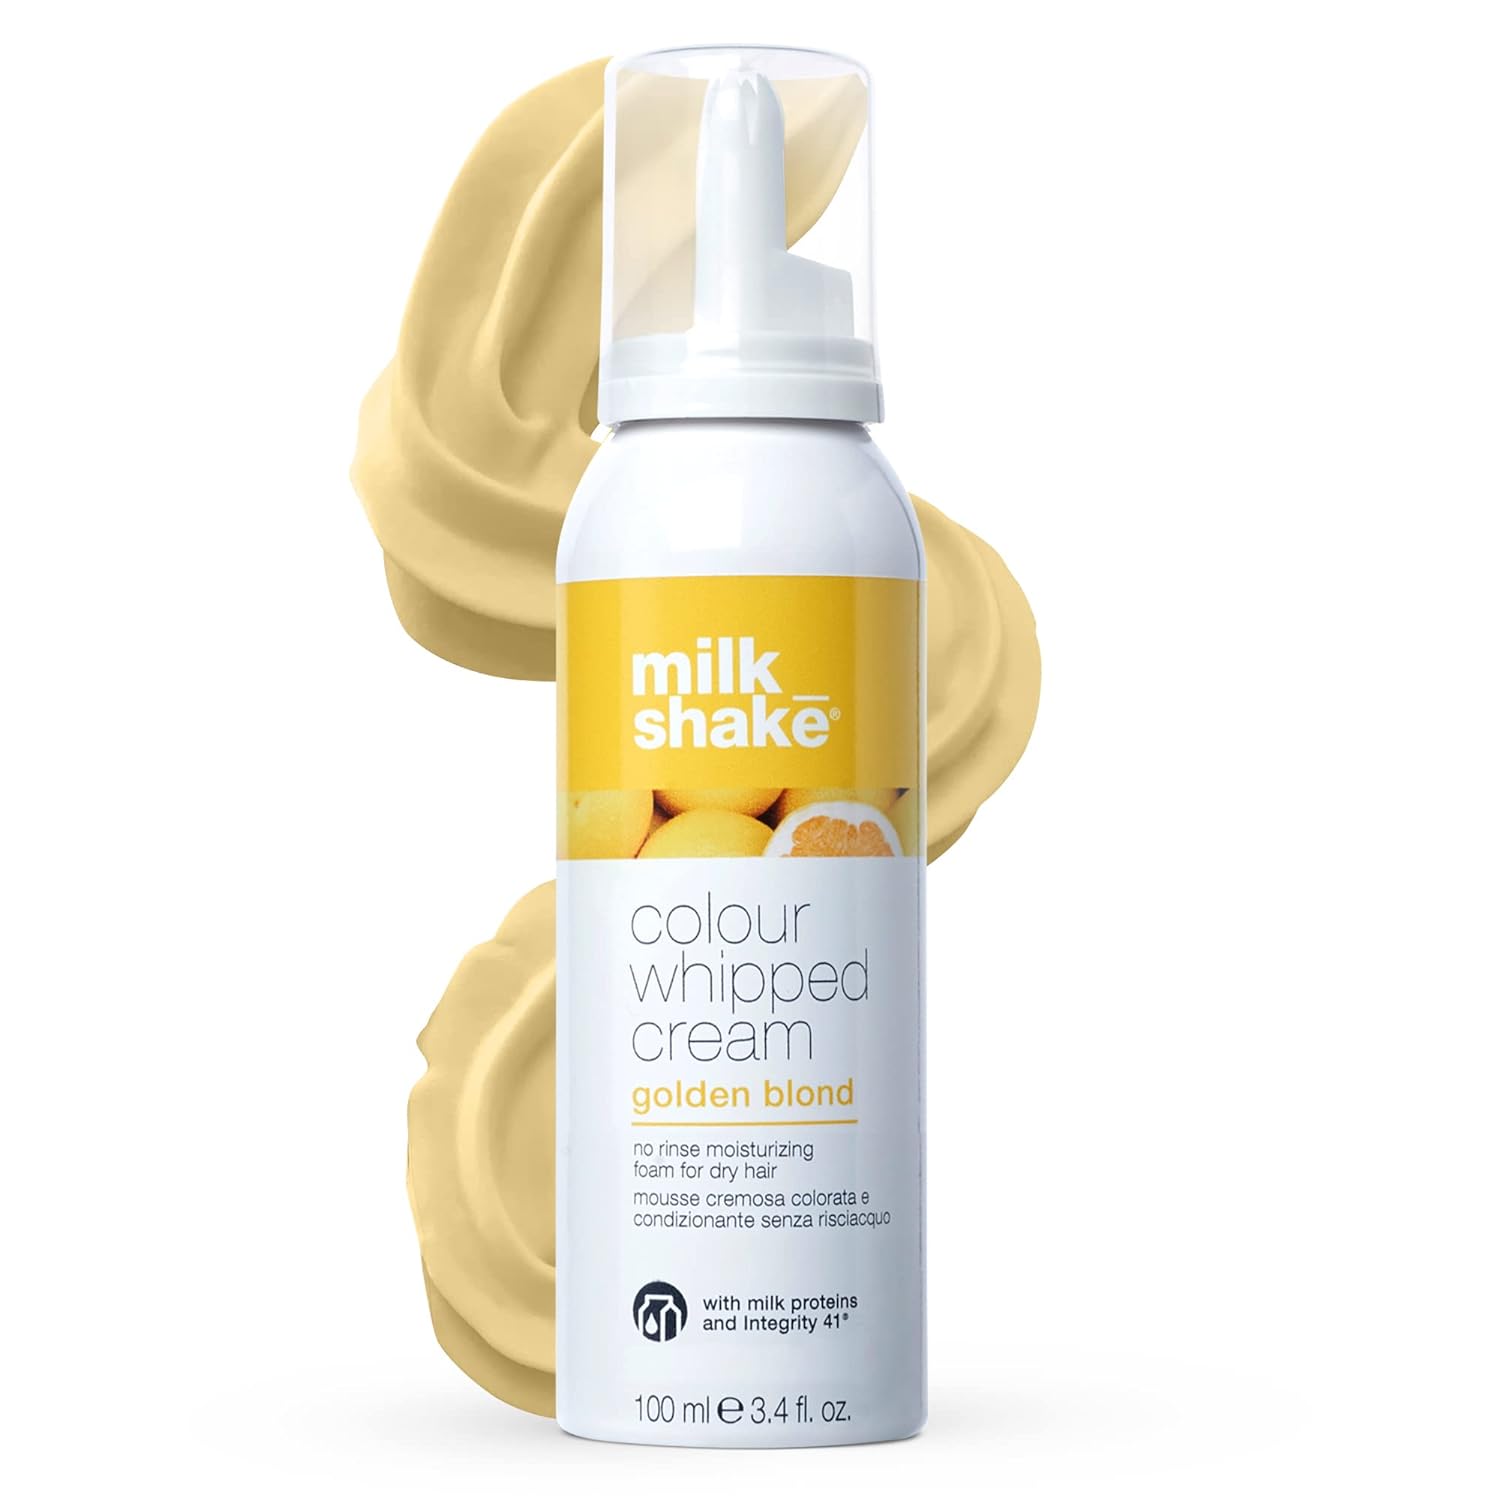 milk_shake Color Whipped Cream Leave In Coloring Conditioner - Provides Temporary Hair Color Tone, Golden Blonde